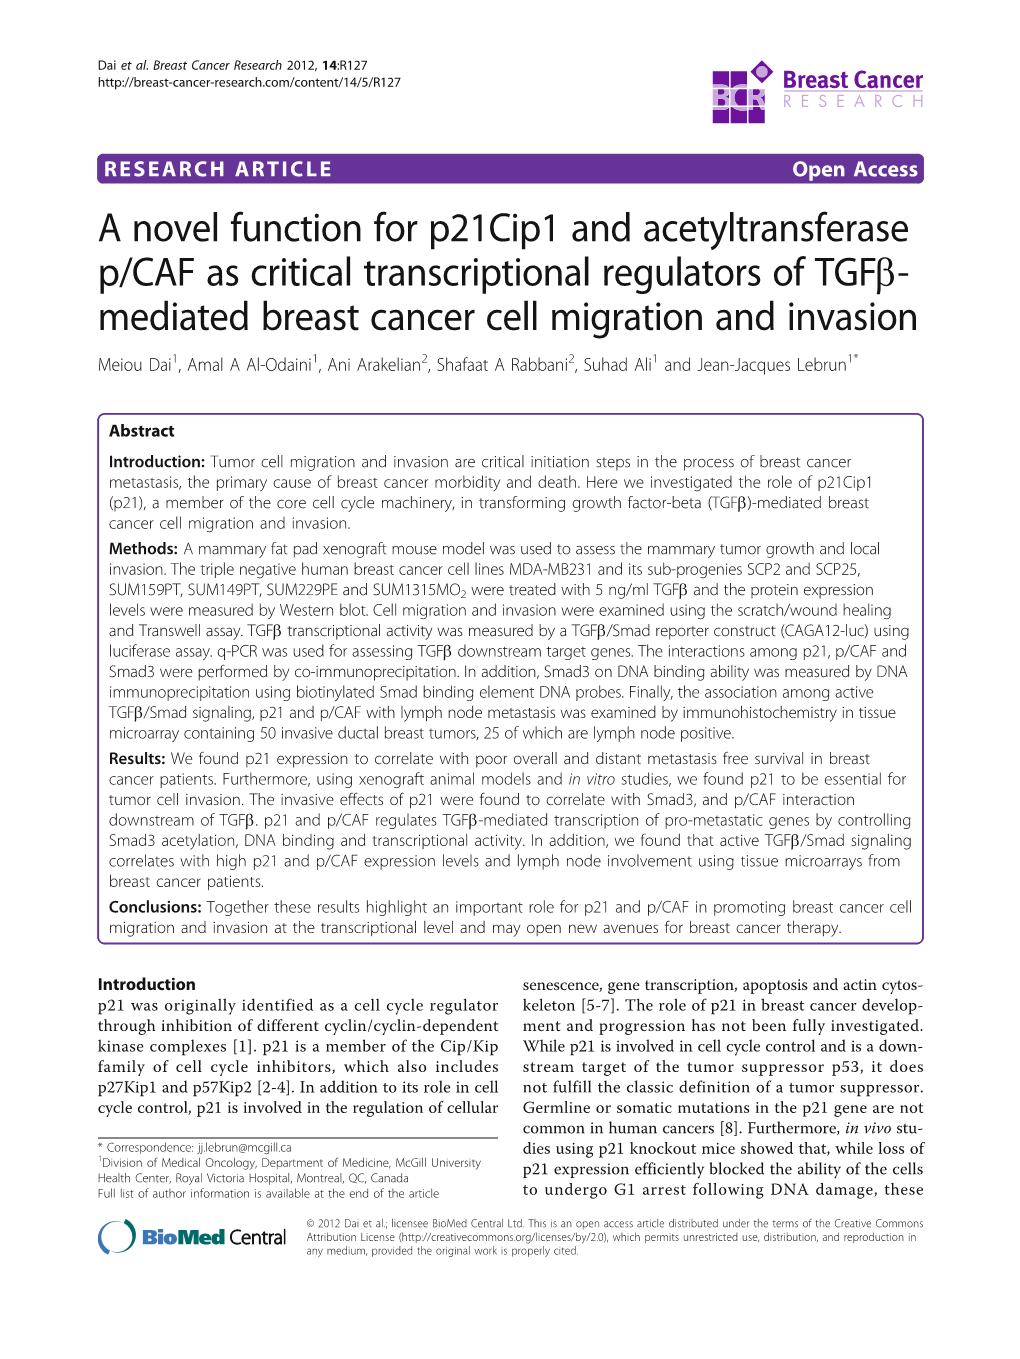 A Novel Function for P21cip1 and Acetyltransferase P/CAF As Critical Transcriptional Regulators of Tgfb